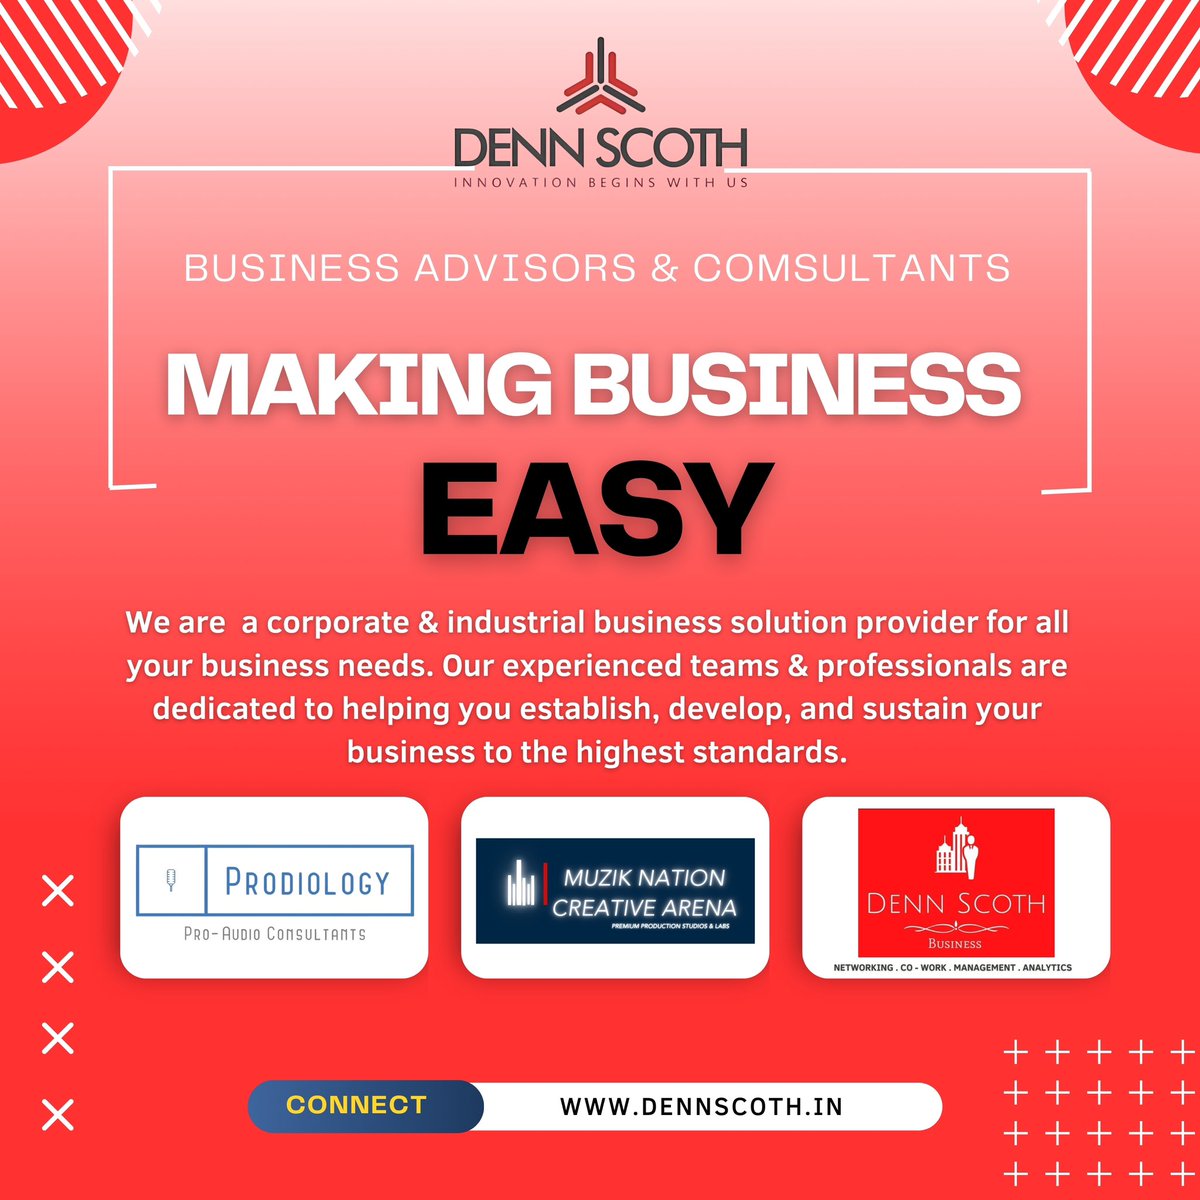 Making Business Easy. We Are Denn Scoth - Innovation Begins With Us! #business #corporate #businesssuccess